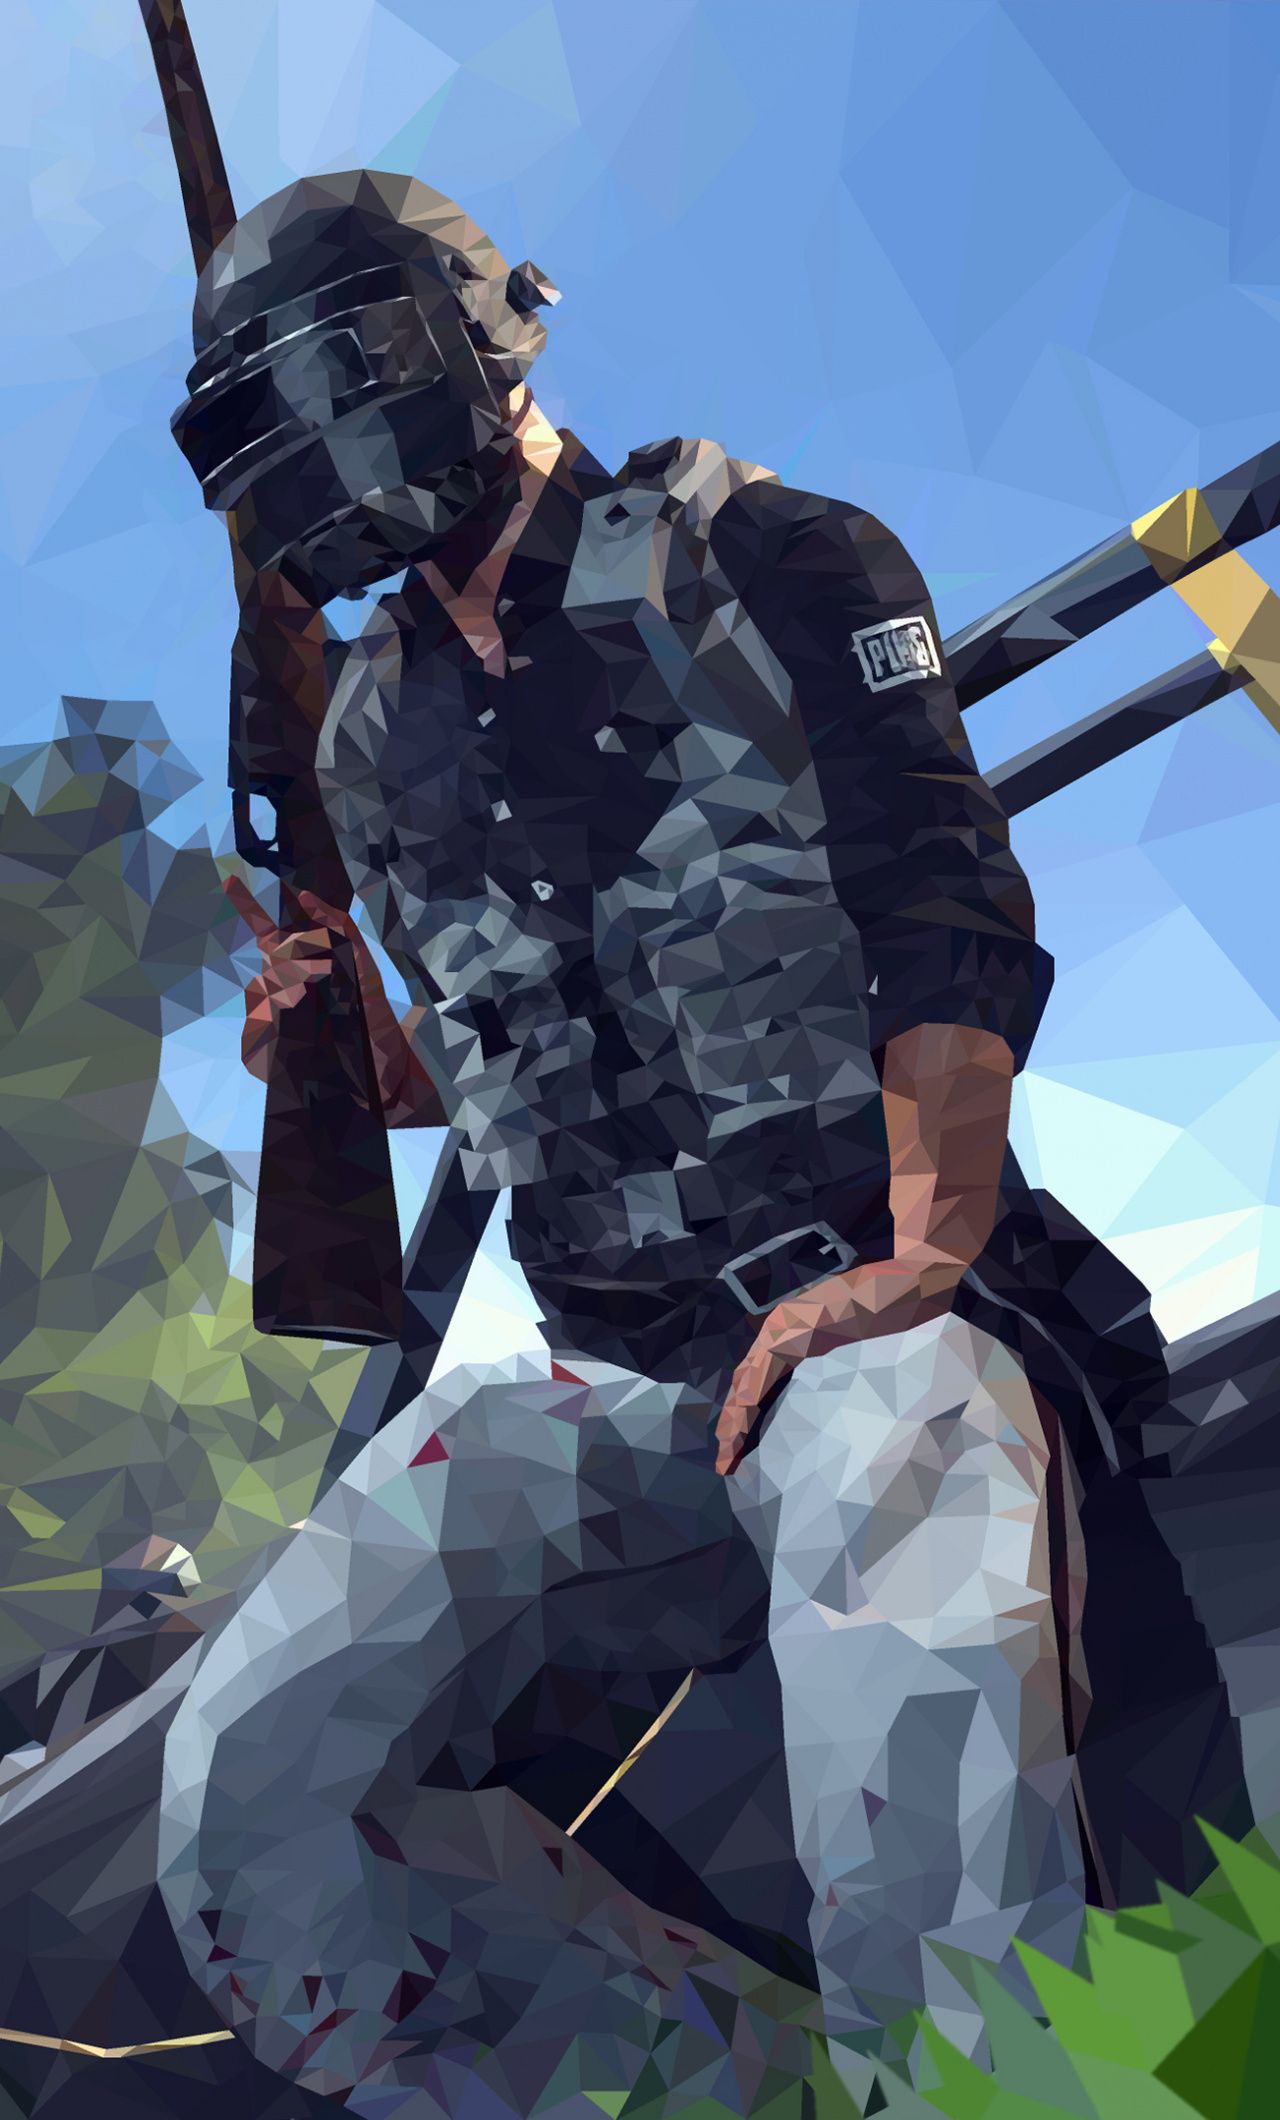 PUBG, video game, low poly, helmet guy, artwork, 1280x2120 wallpaper. Game wallpaper iphone, Android phone wallpaper, iPhone wallpaper